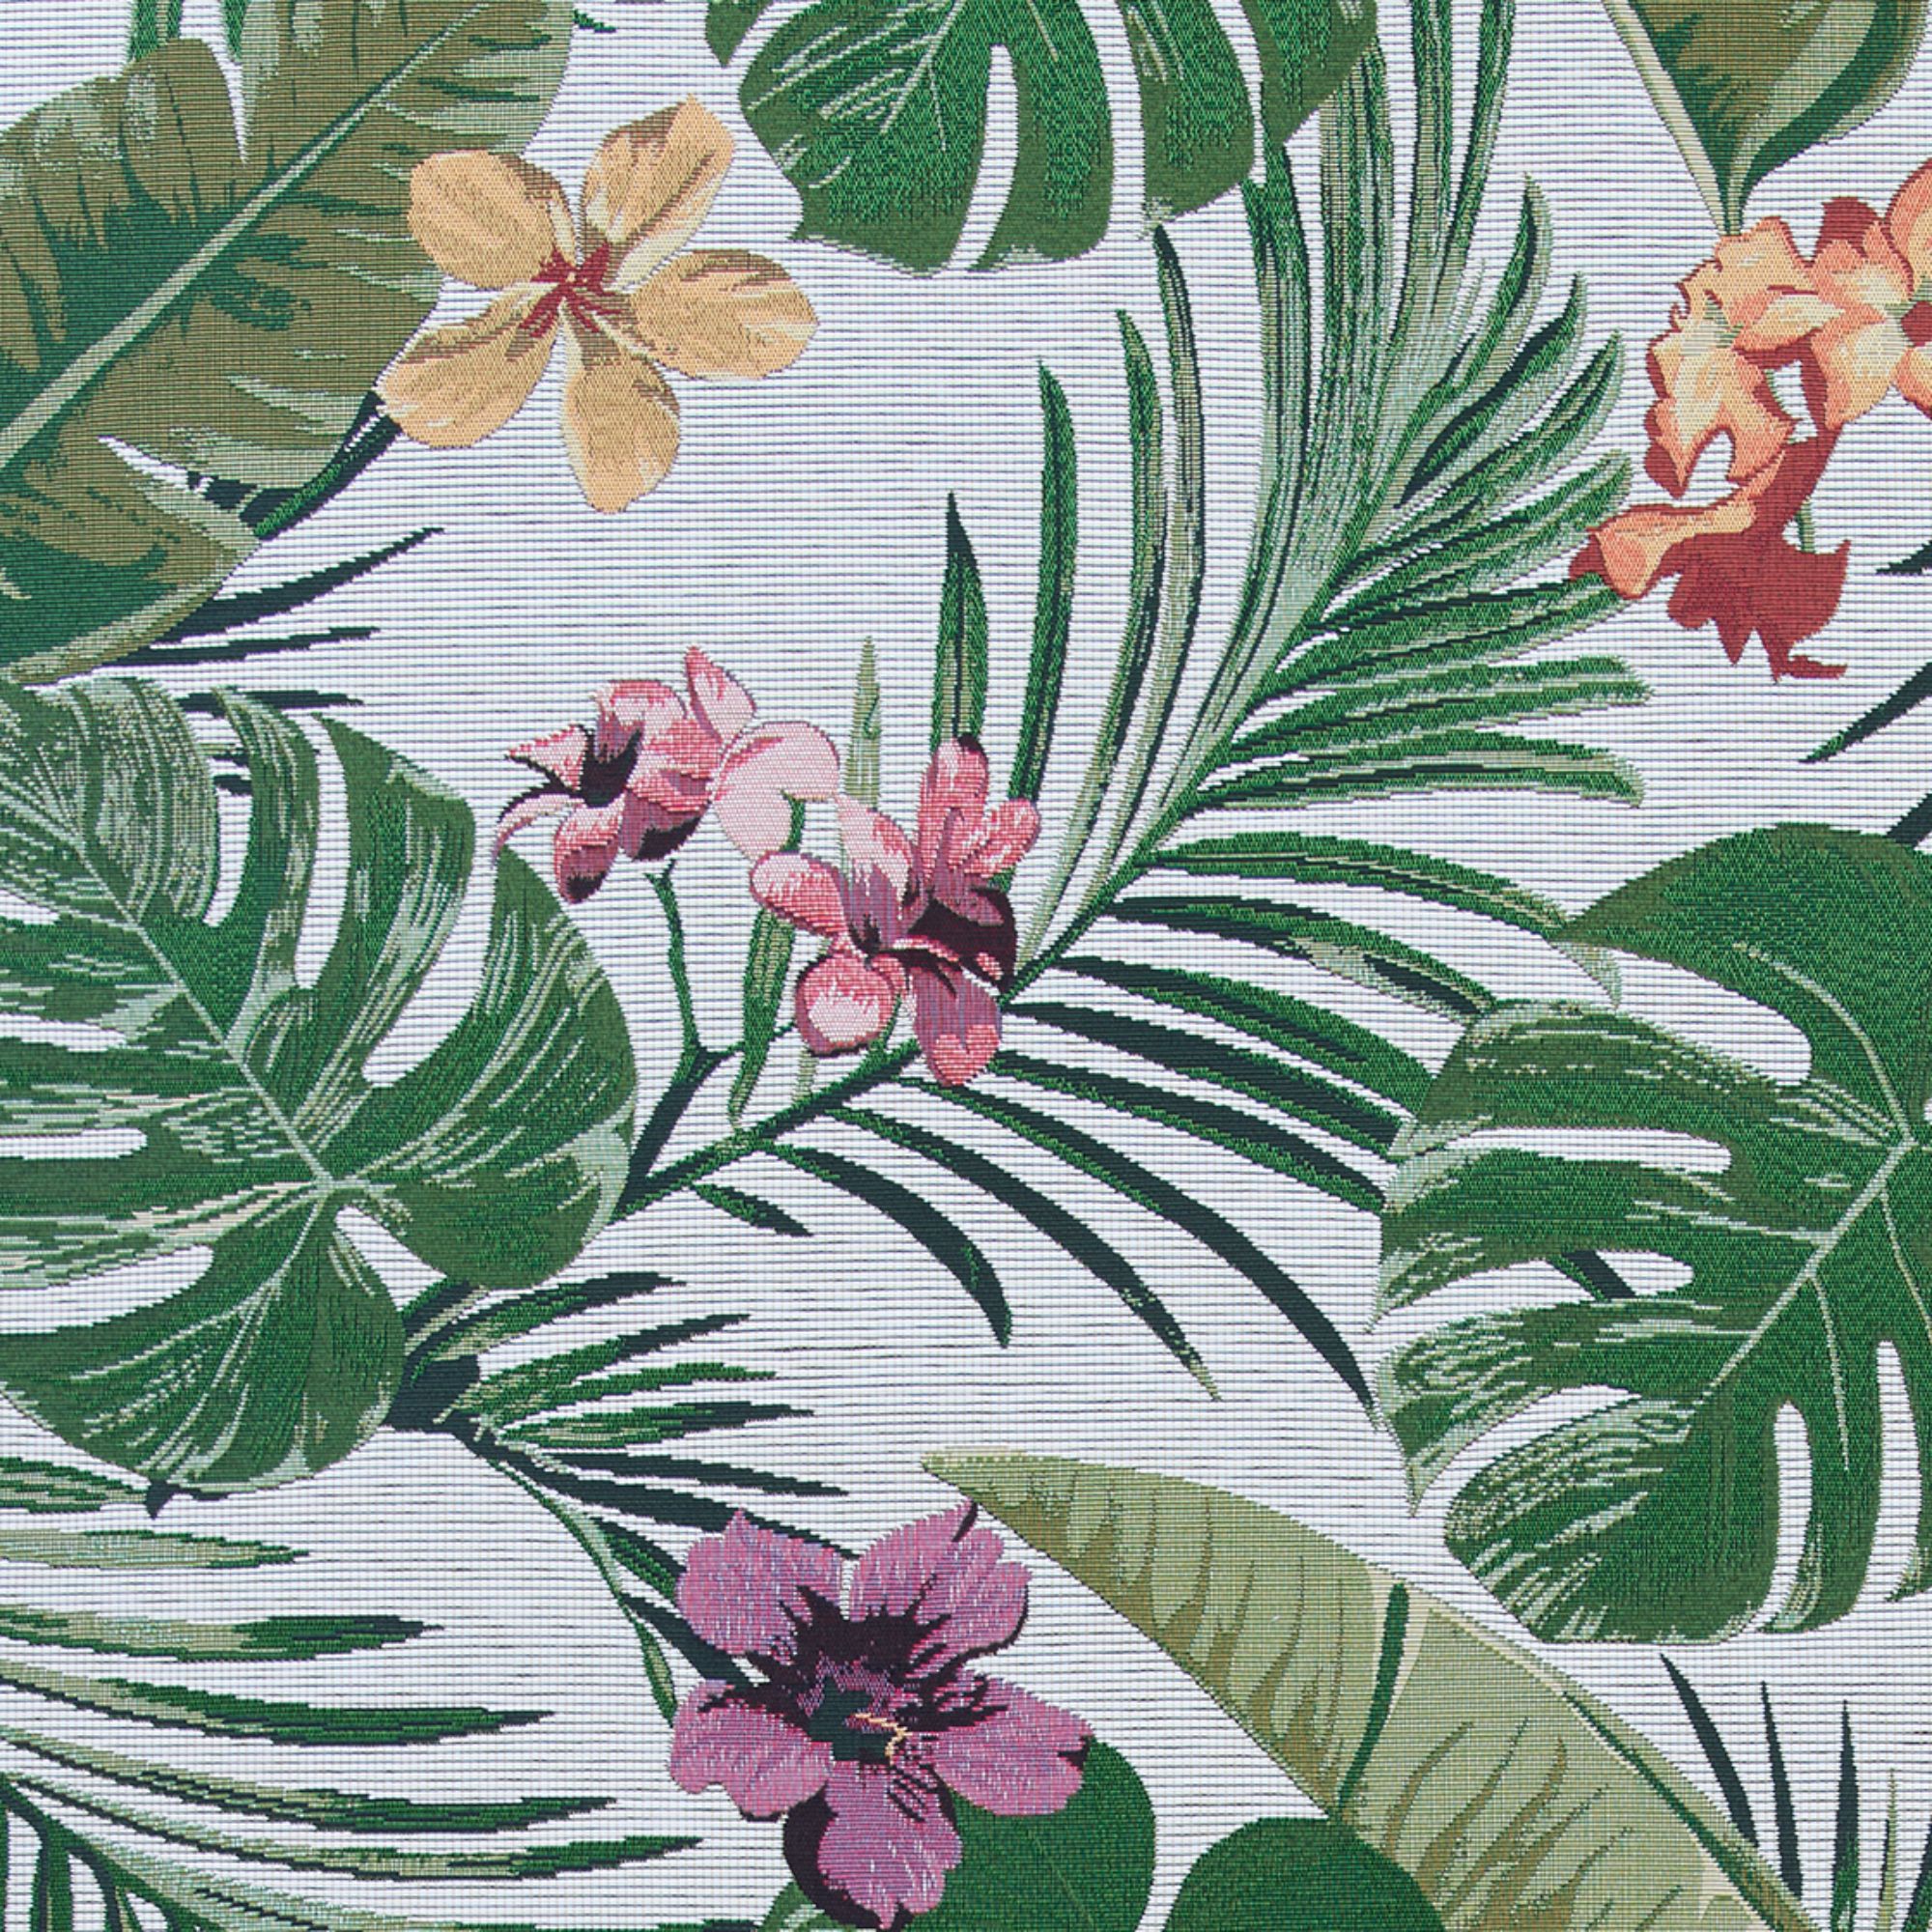 Couristan Dolce Flowering Fern Indoor / Outdoor Area Rug, Ivory-Hunter Green, 5'3" x 7'6" - image 3 of 6